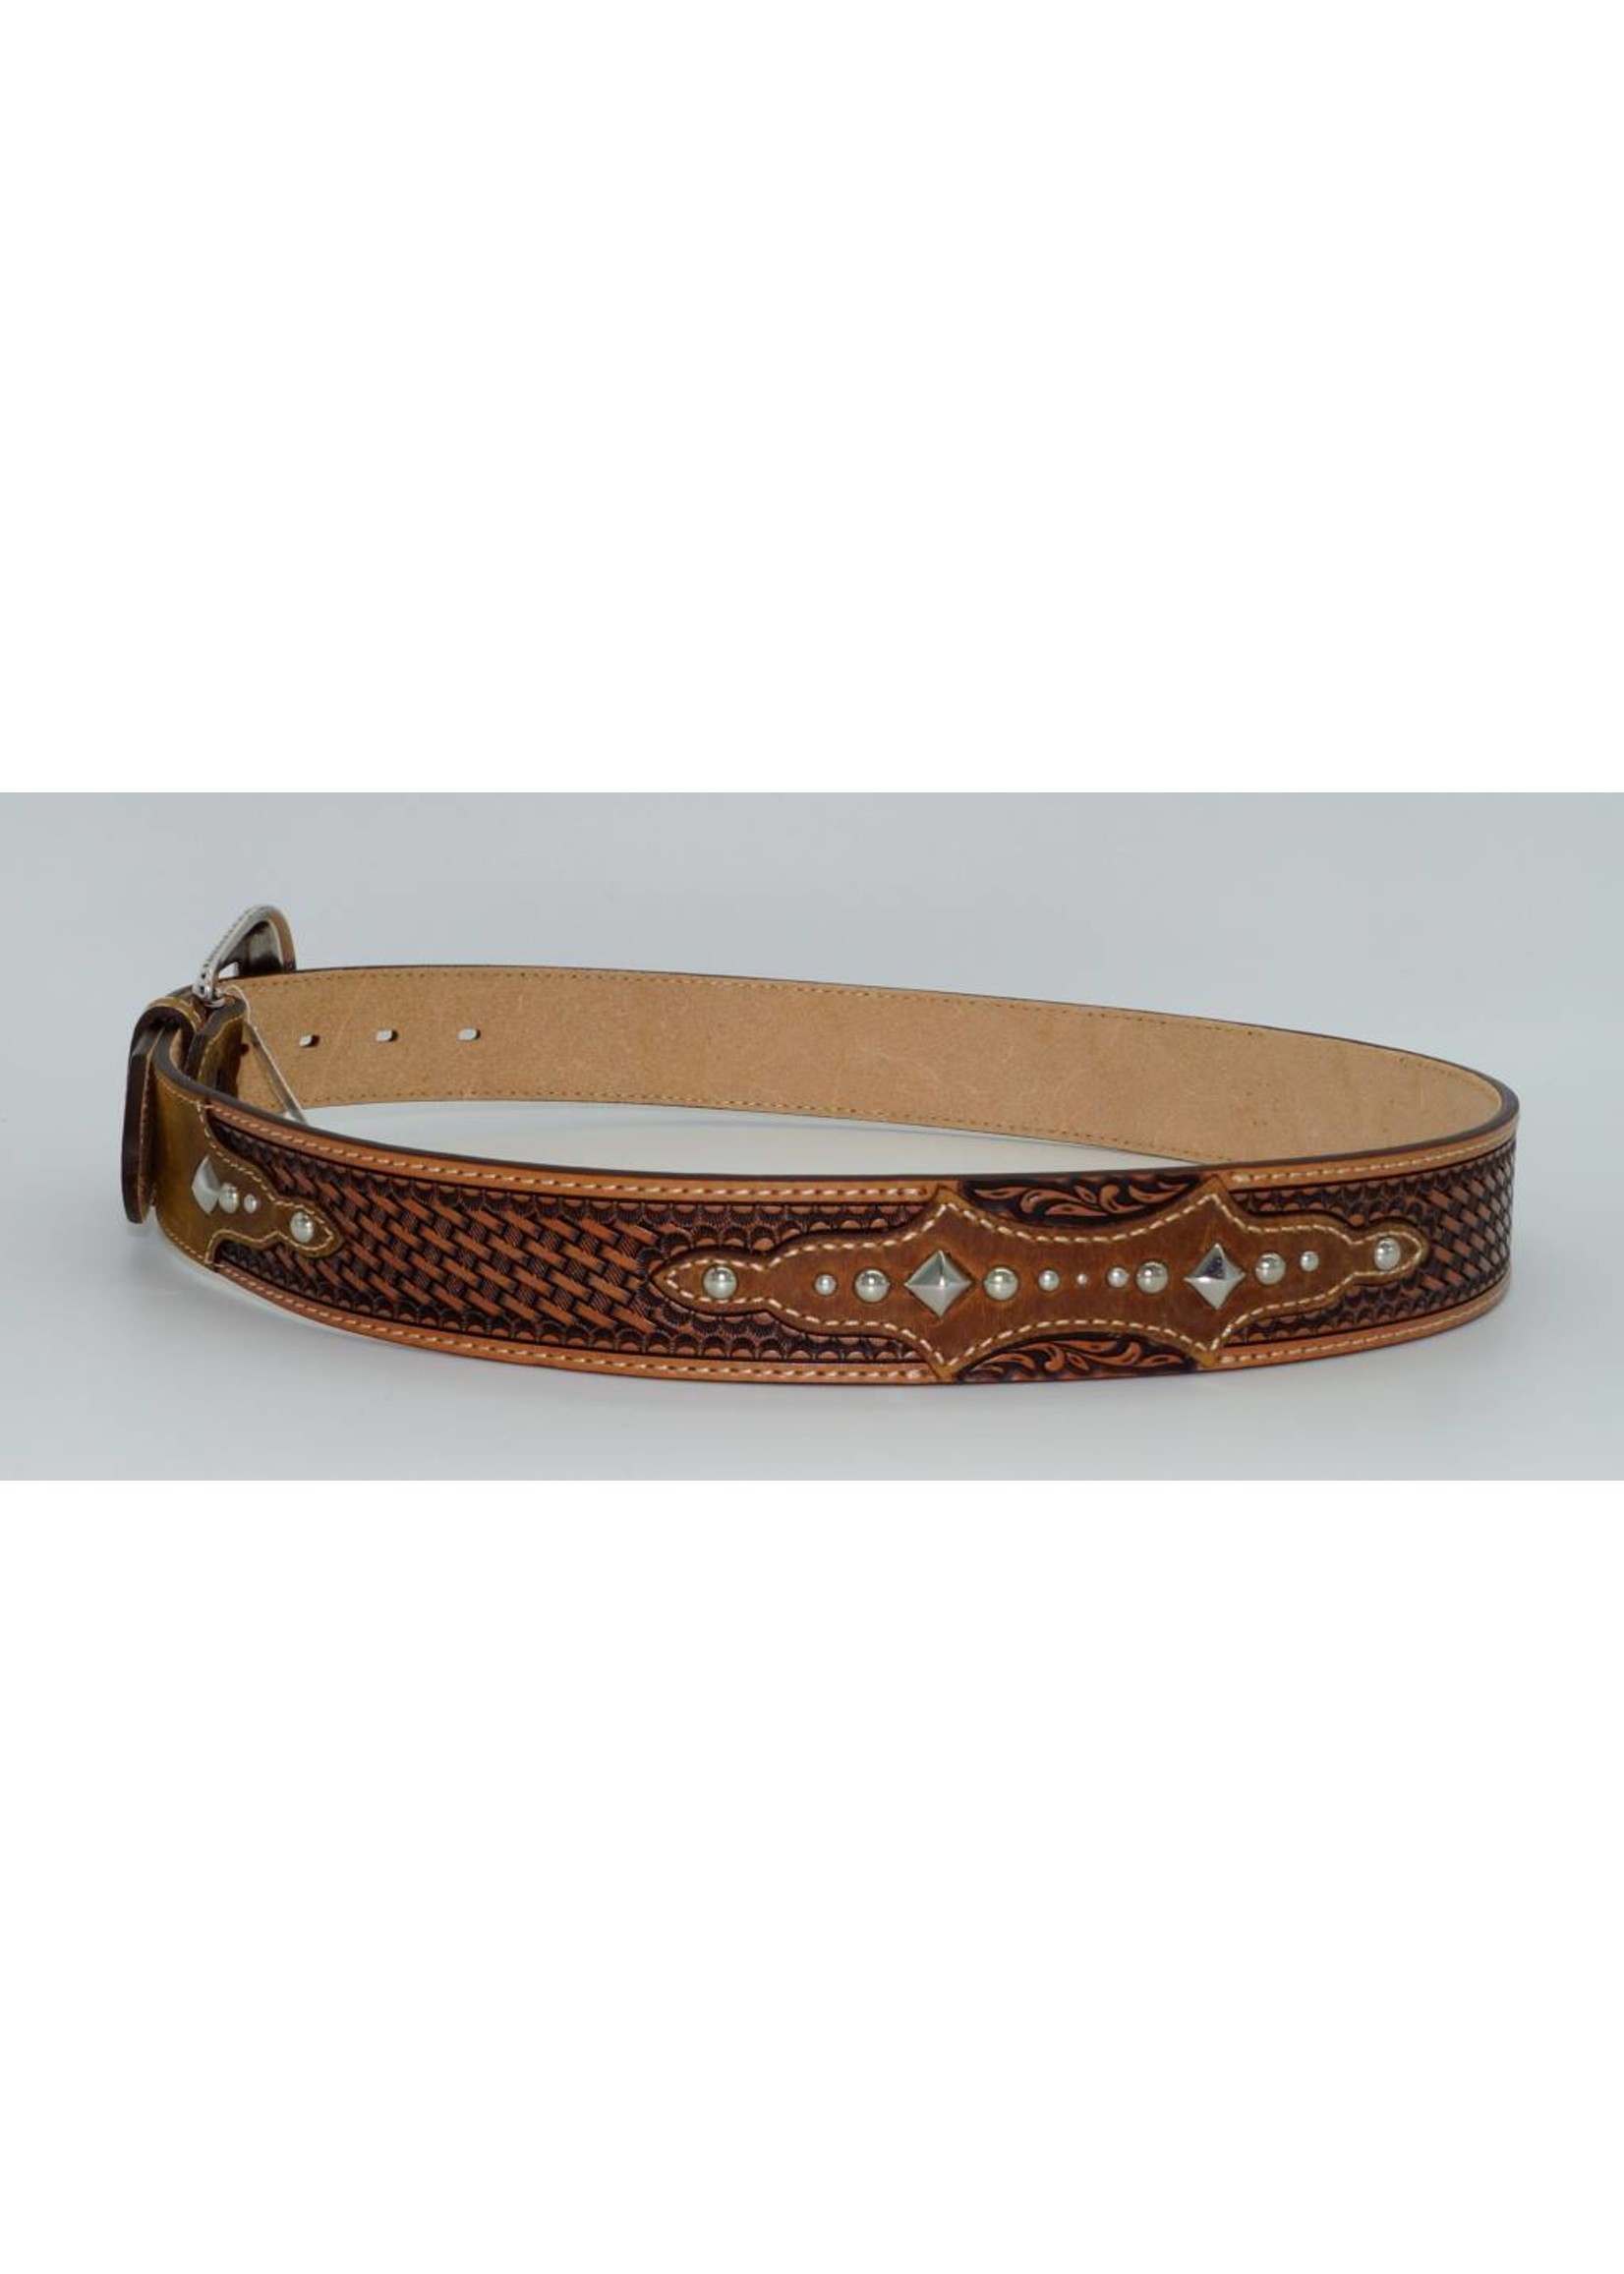 3D Belt 34 inch Brighton Basketweave Tooled The Bayfield 1 1/2 inch Mens Leather Tooled Tan, Men's, Beige